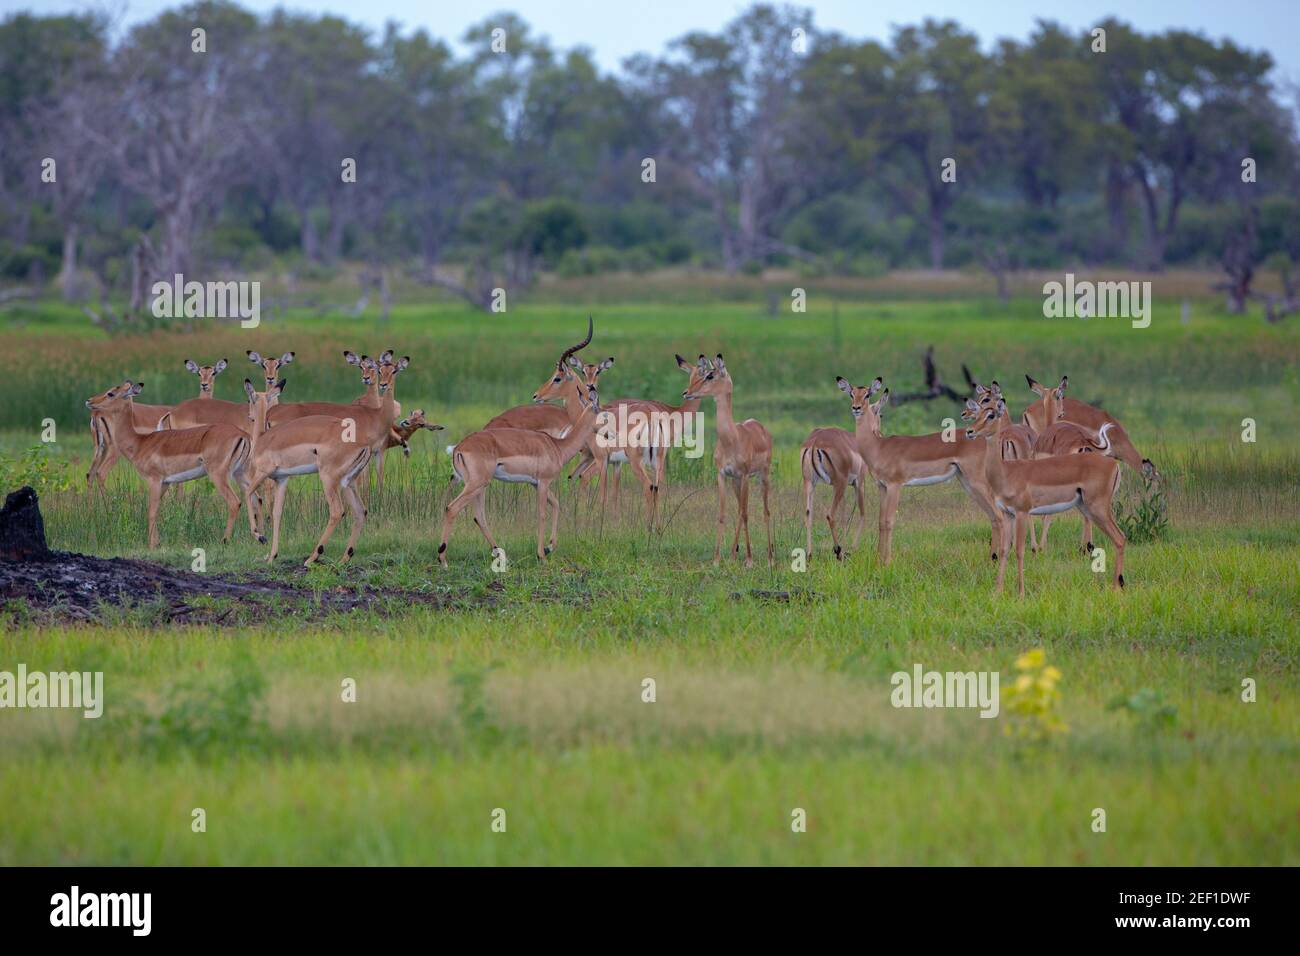 Impala (Aepyceros melampus). Herd with the horned male standing in the middle, unhorned females, in an anxious pose, surrounding. Group behaviour when Stock Photo